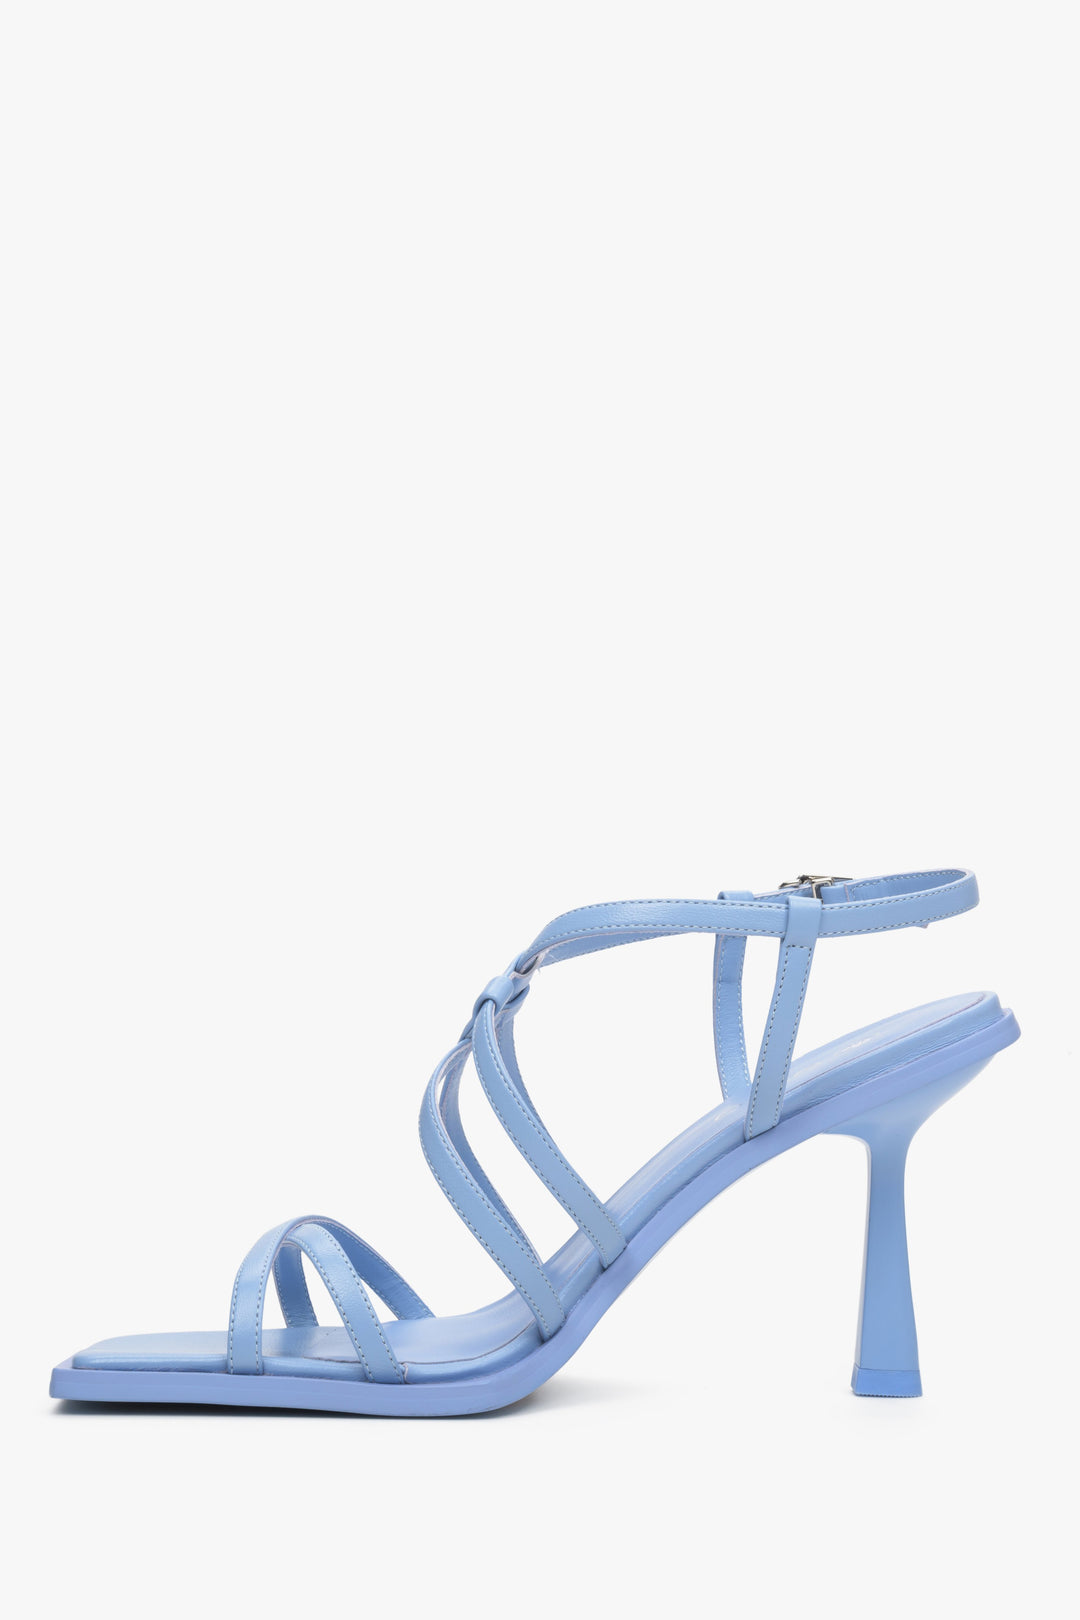 Women's strappy, heeled sandals in light blue colour - shoe profile.